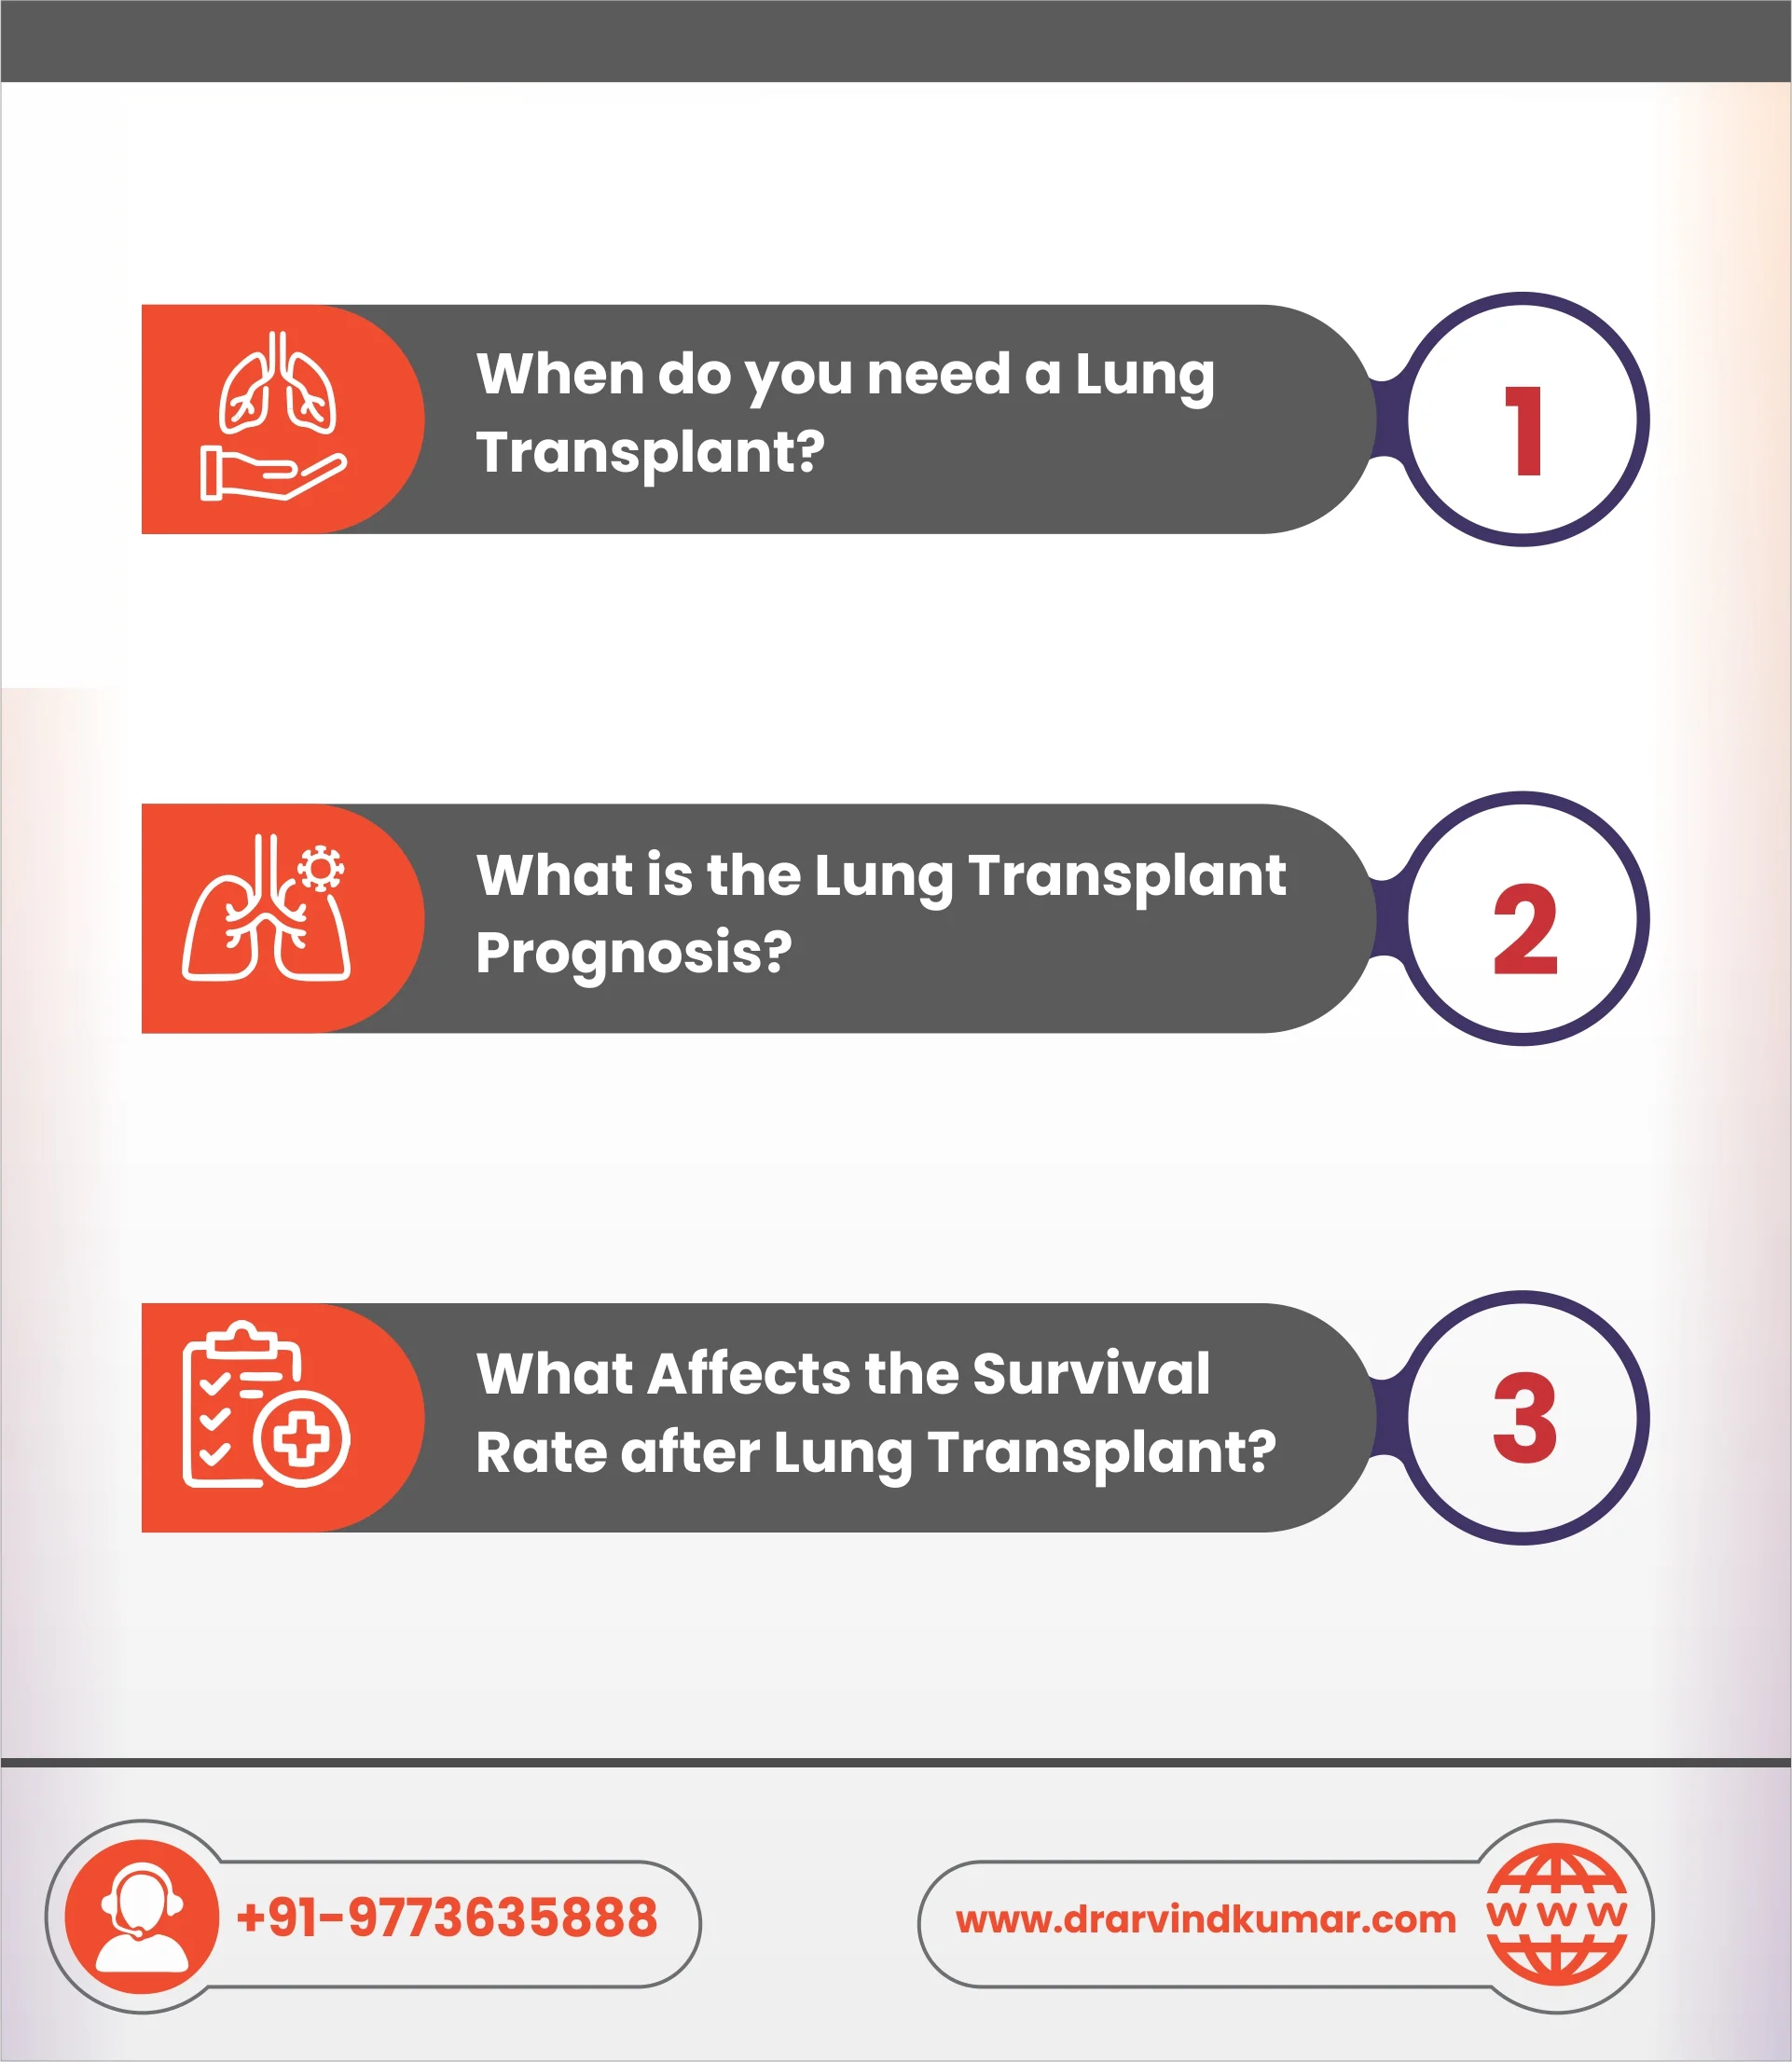 What Are the Odds of Surviving a Lung Transplant?